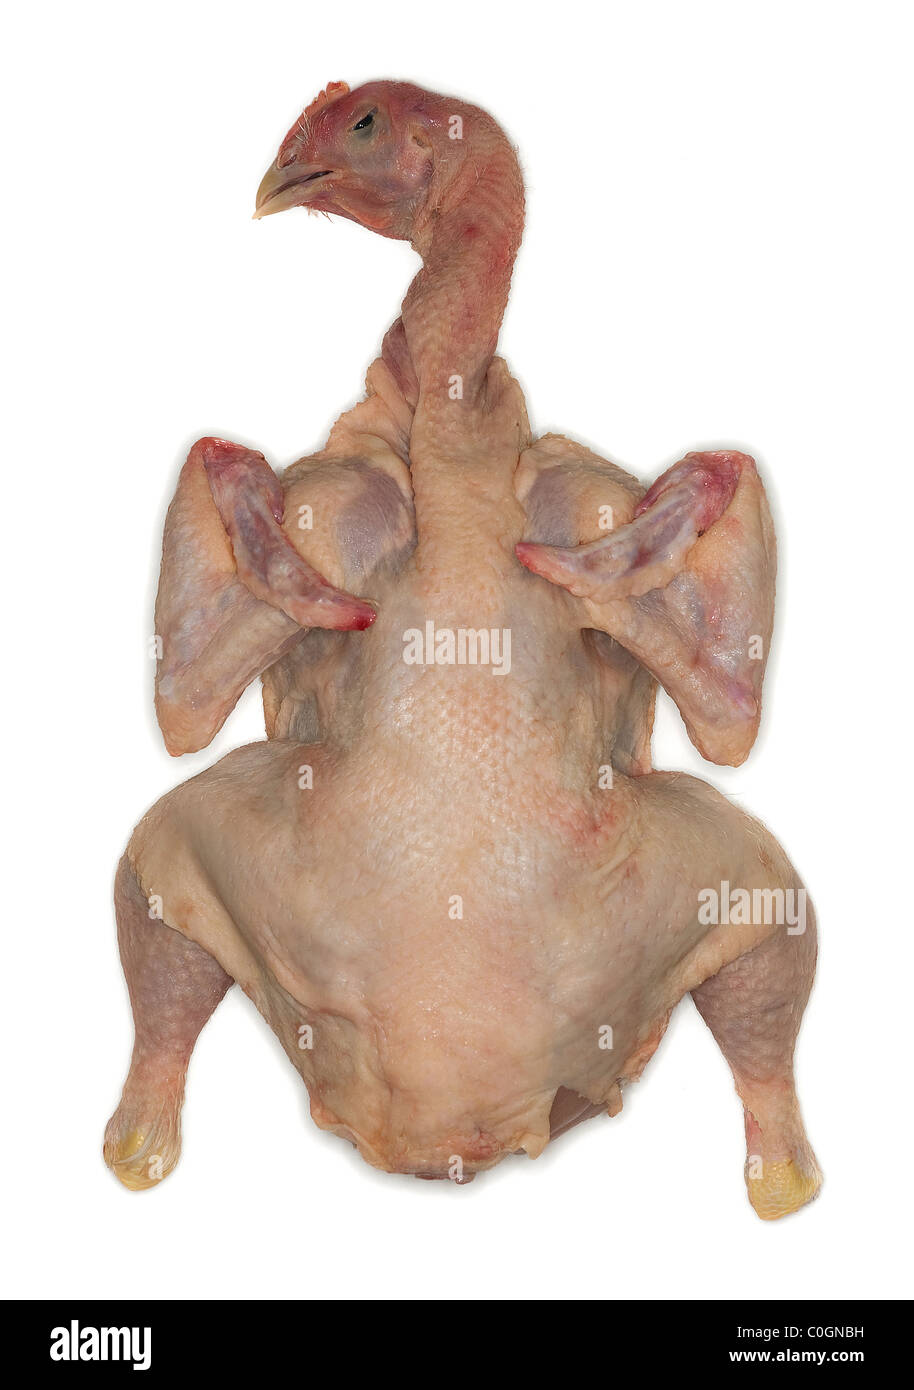 Head of a dead and plucked chicken ready to be cooked cutout Stock Photo